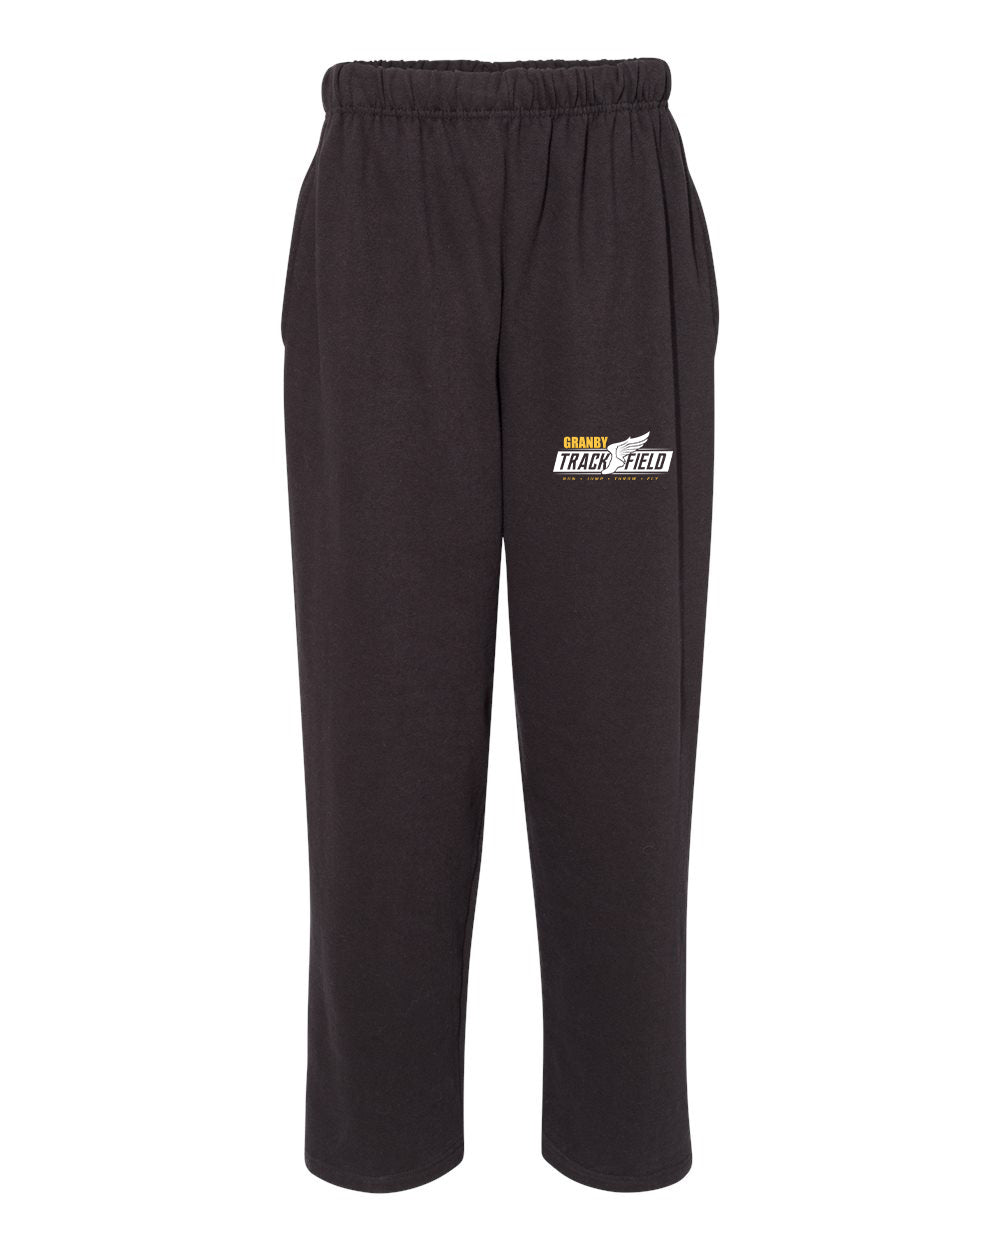 Granby High T&F Adult Open Bottom Sweatpants - 5577 (color options available)